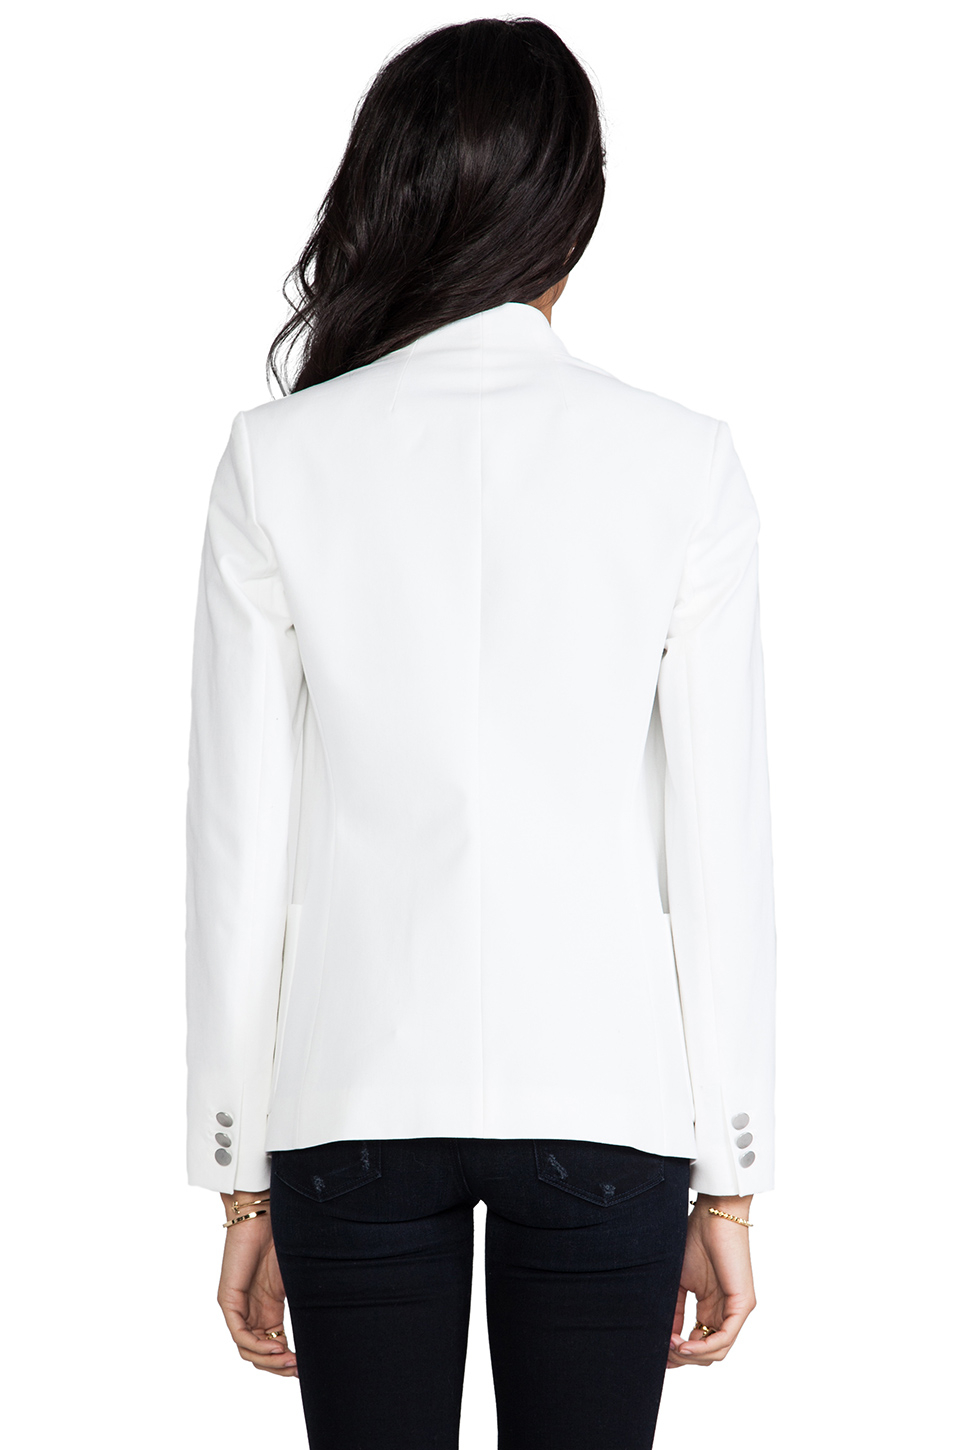 Lyst - Theory Checklist Kacela Jacket in White in White